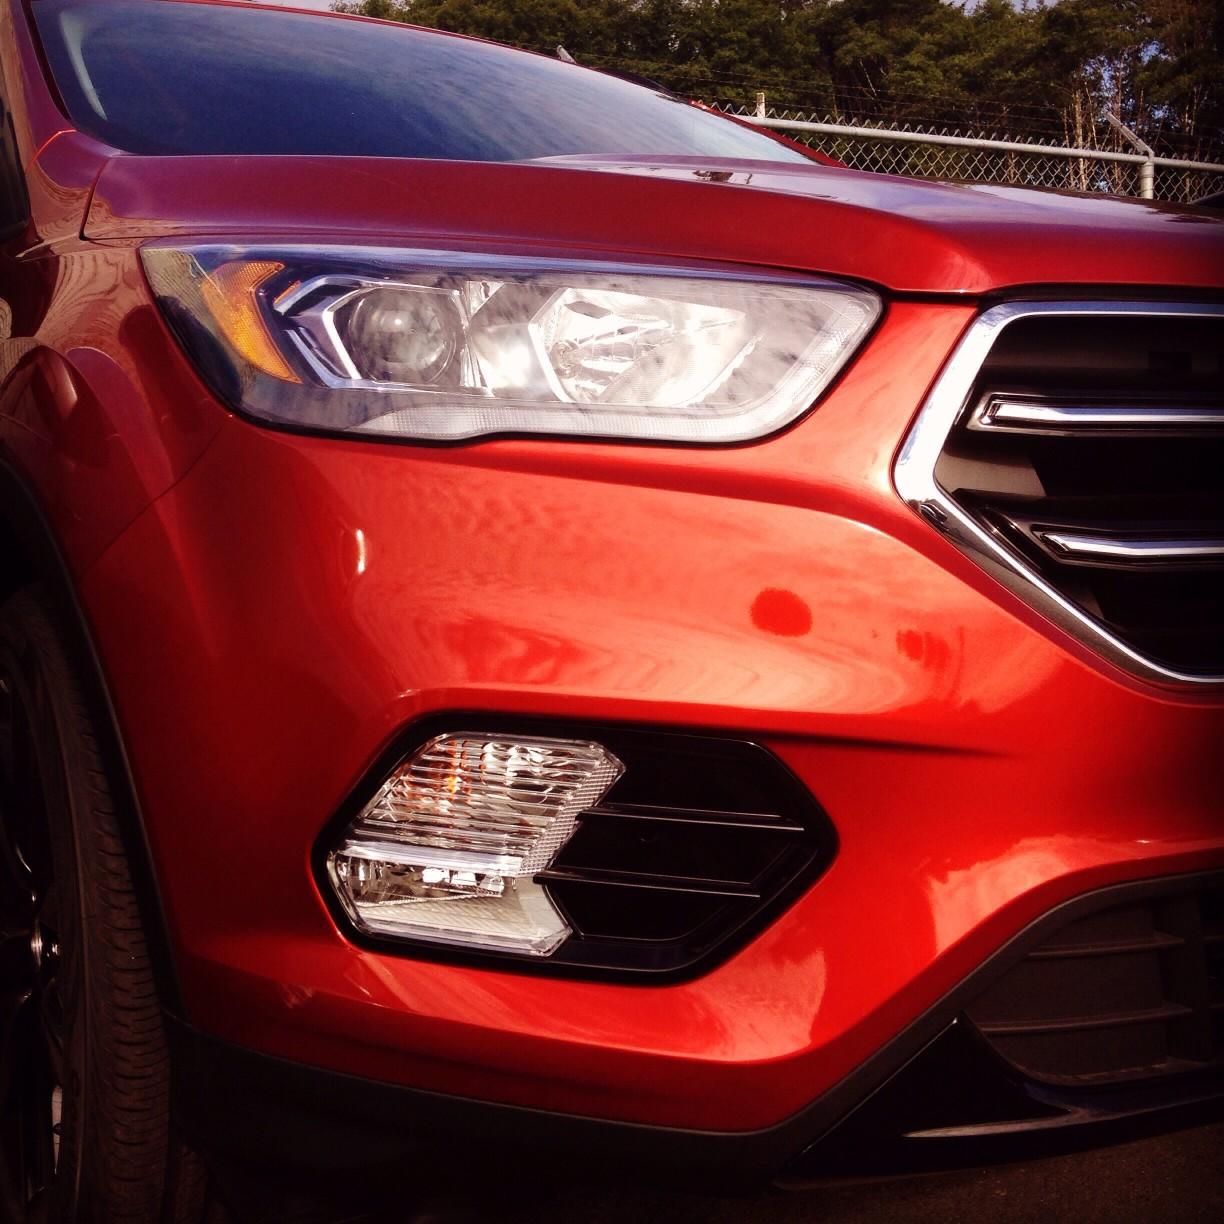 A Texas woman’s Ford Escape was involved in a car accident during routine maintenance